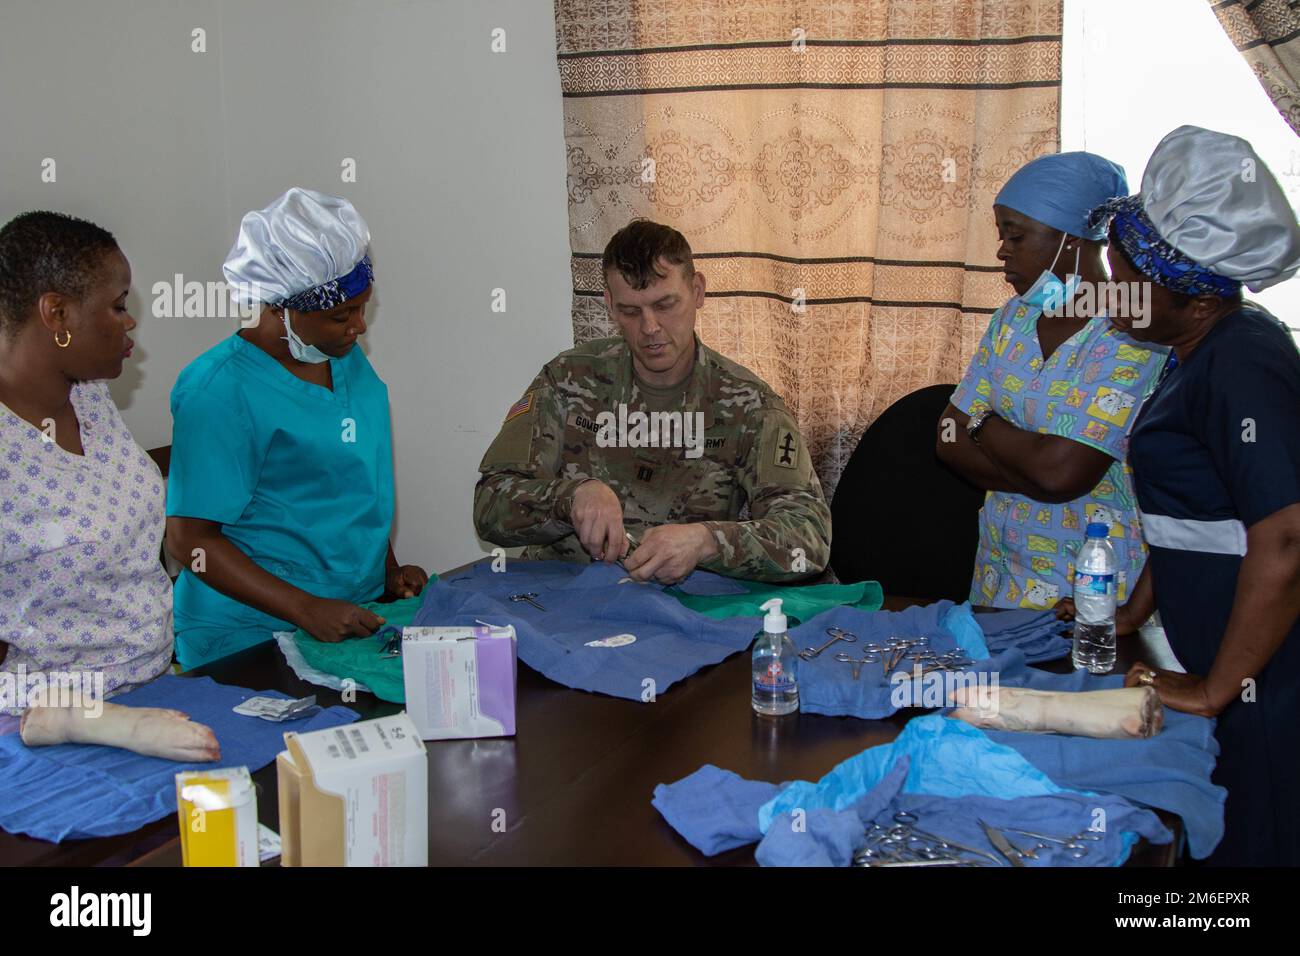 U.S. Army Capt. Matthew Gomberg, a battalion physician assistant assigned to Headquarters and Headquarters Company, 3rd Battalion, 126th Infantry Regiment (3-126th IN), Michigan National Guard (MING) conducts a suture course for nursing staff at 14 Military Hospital in Monrovia, Liberia April 26, 2022. MING's State Partnership Program with Liberia was on full display as various medial units conducted a medical 'best practices' exchange in Monrovia April 25-29, 2022, at the hospital. Together with the AFL, MING helped establish the facility in September 2021, making it the country's first milit Stock Photo